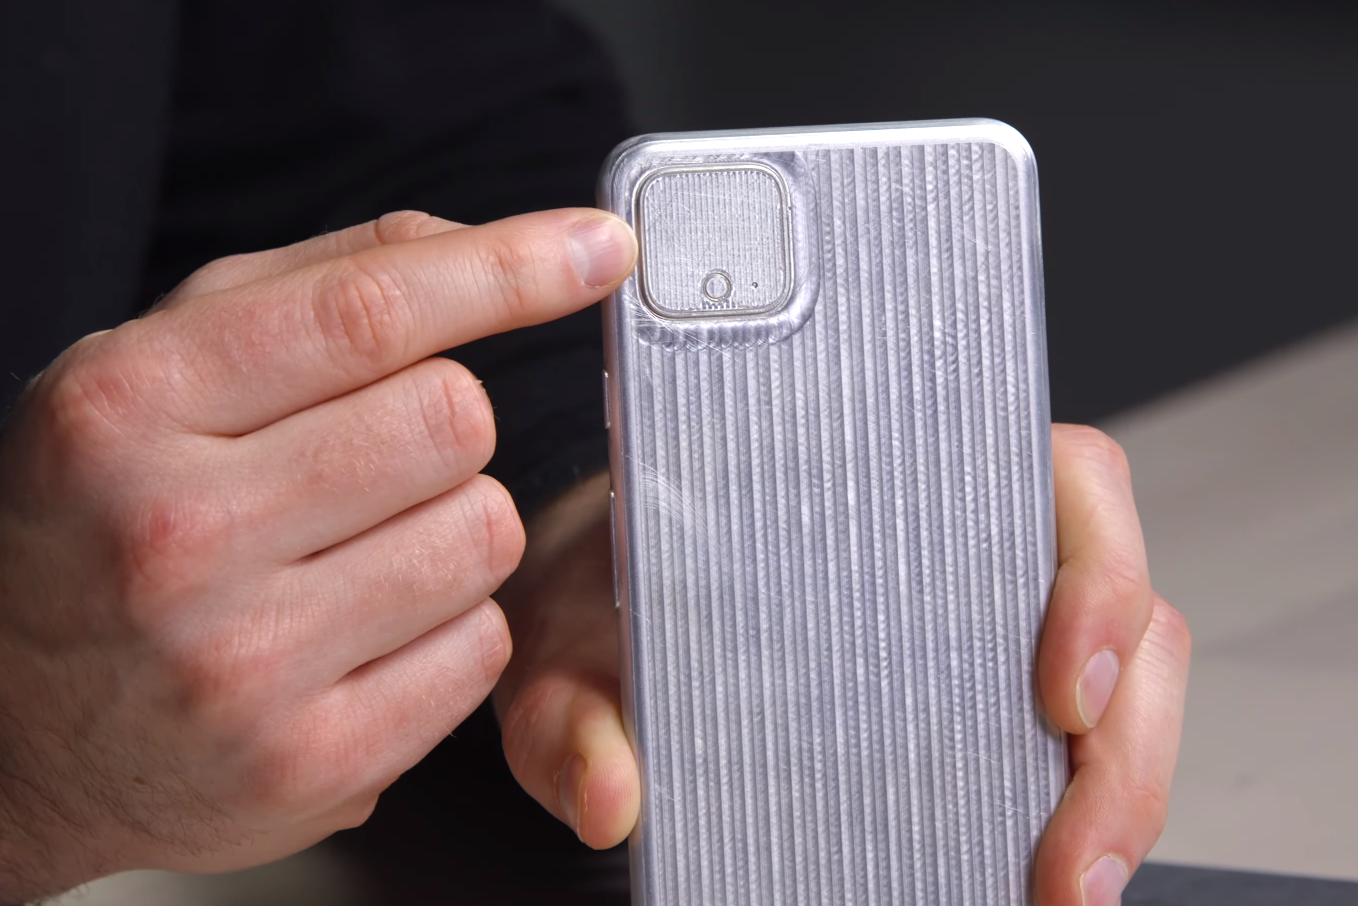 Google Pixel 4 case model - Google Pixel 4 could include new feature that dramatically improves display